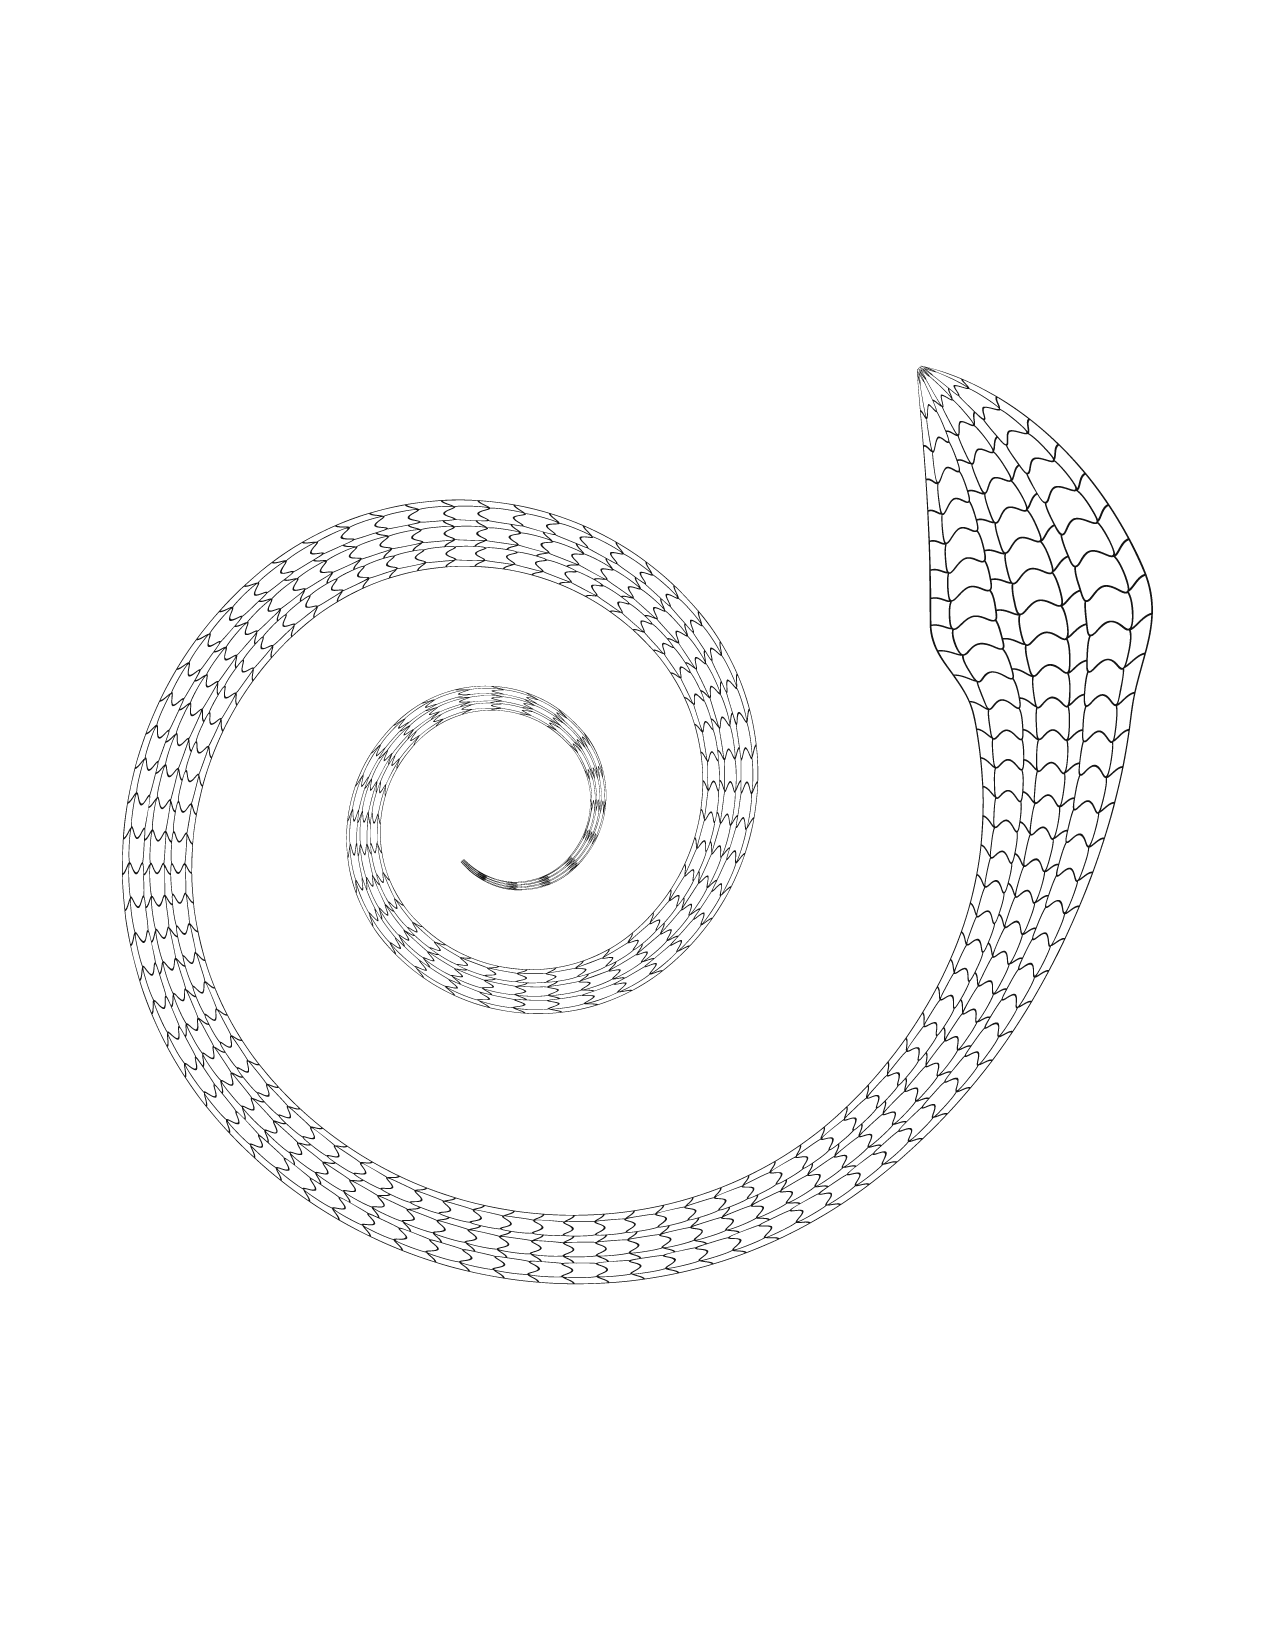 Spiral Snake Coloring Page